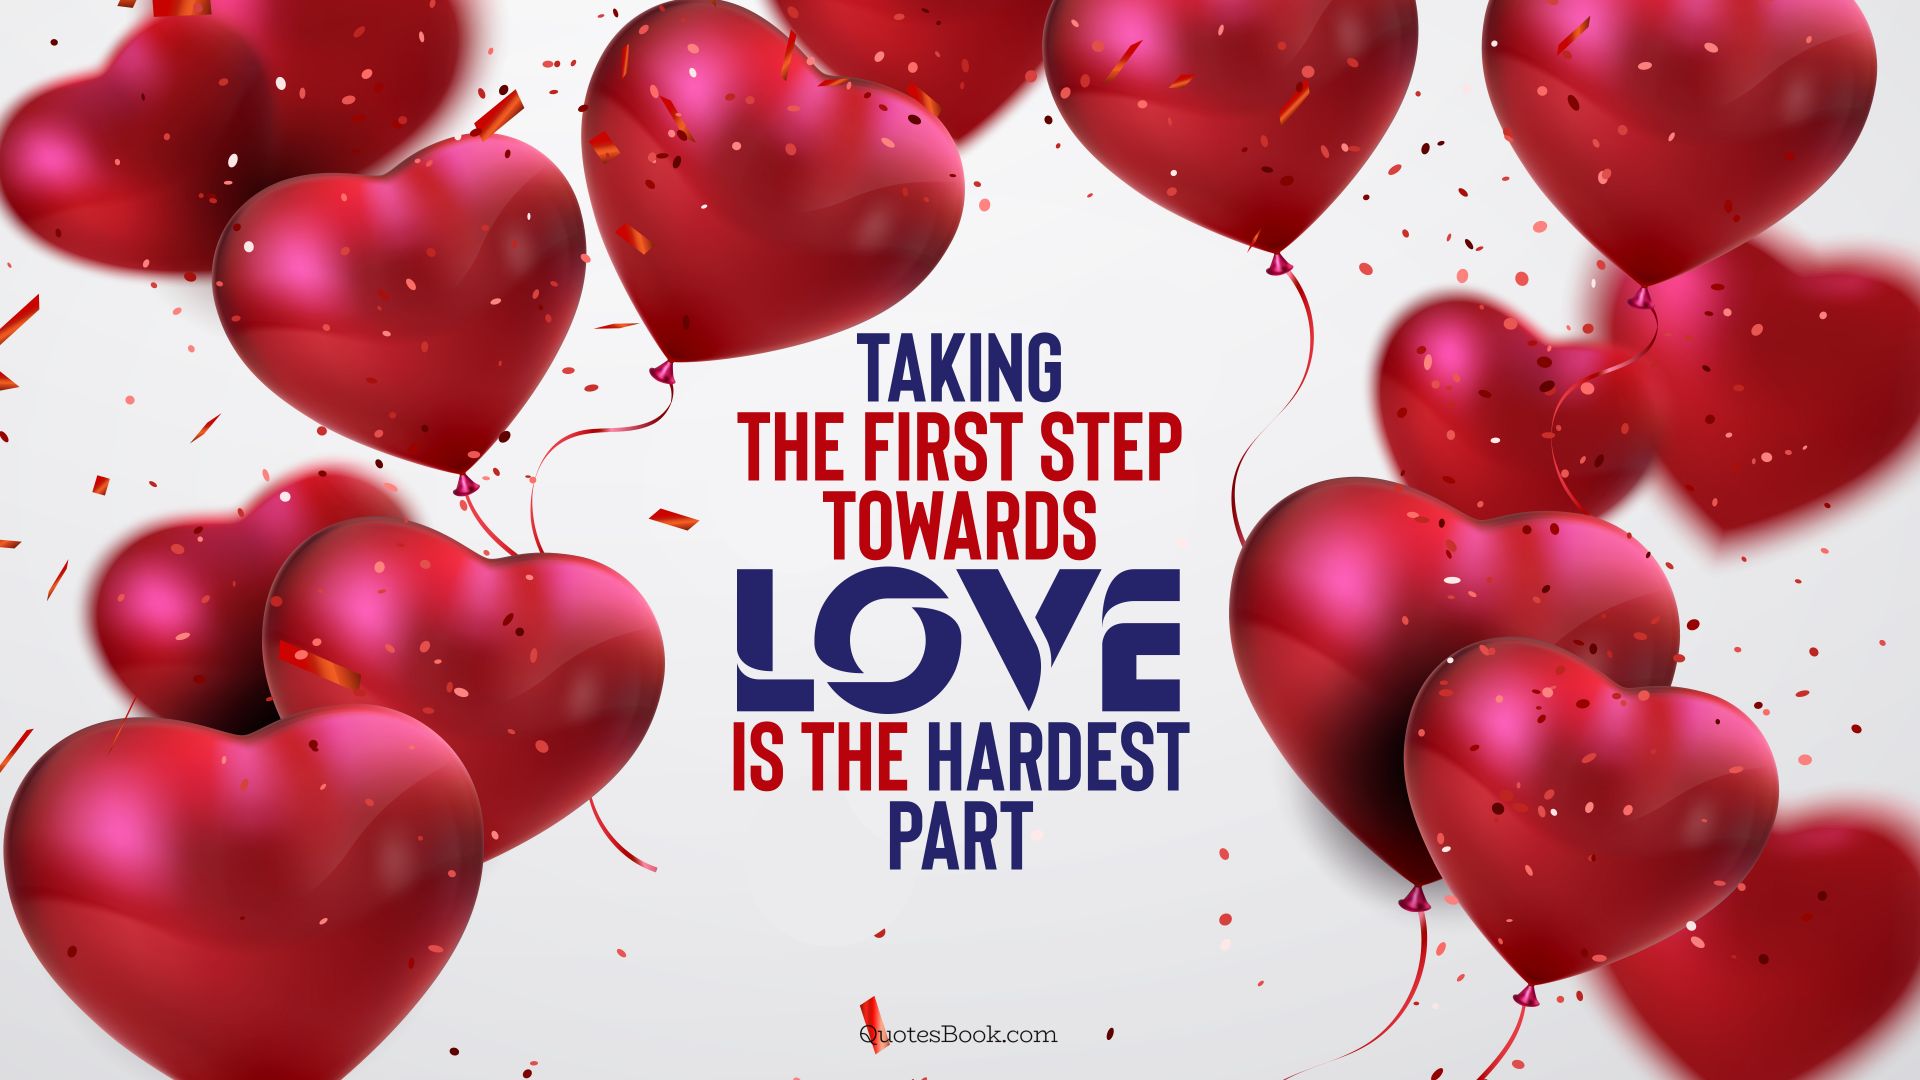 Taking the first step towards love is the hardest part. - Quote by QuotesBook